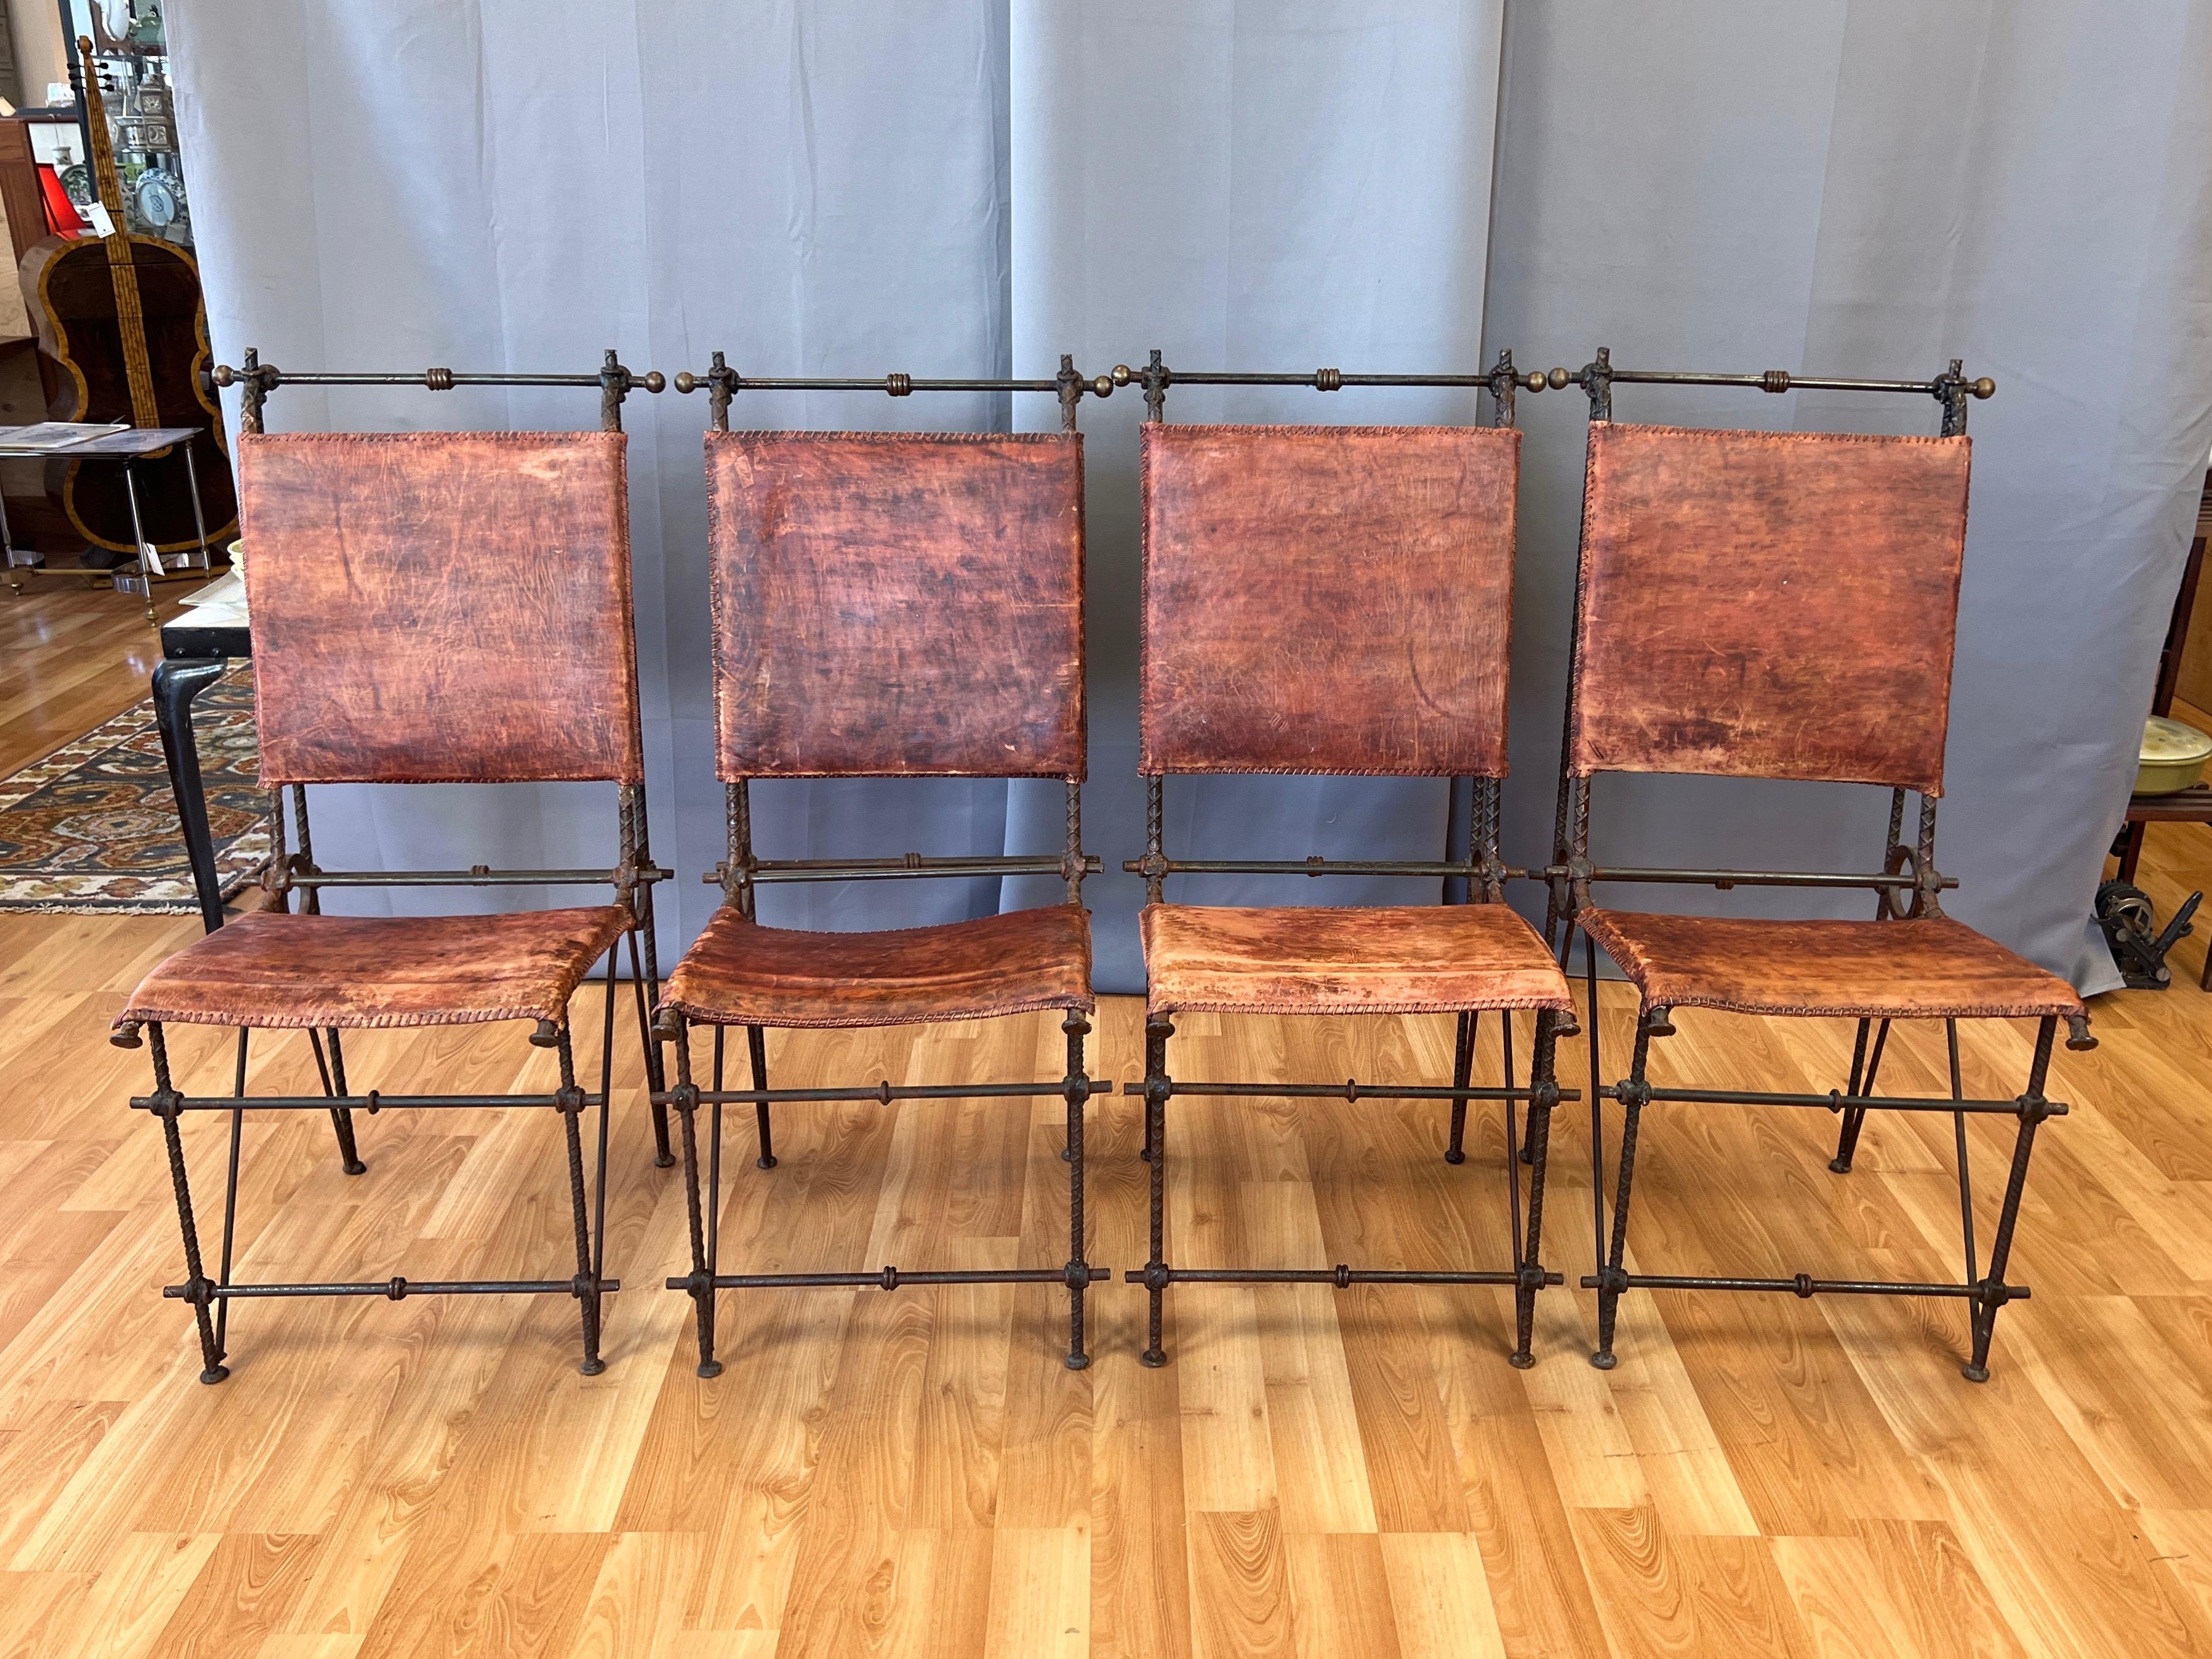 Israeli Set of 4 Ilana Goor-Attributed Brutalist Metal and Leather Dining Chairs, 1980 For Sale